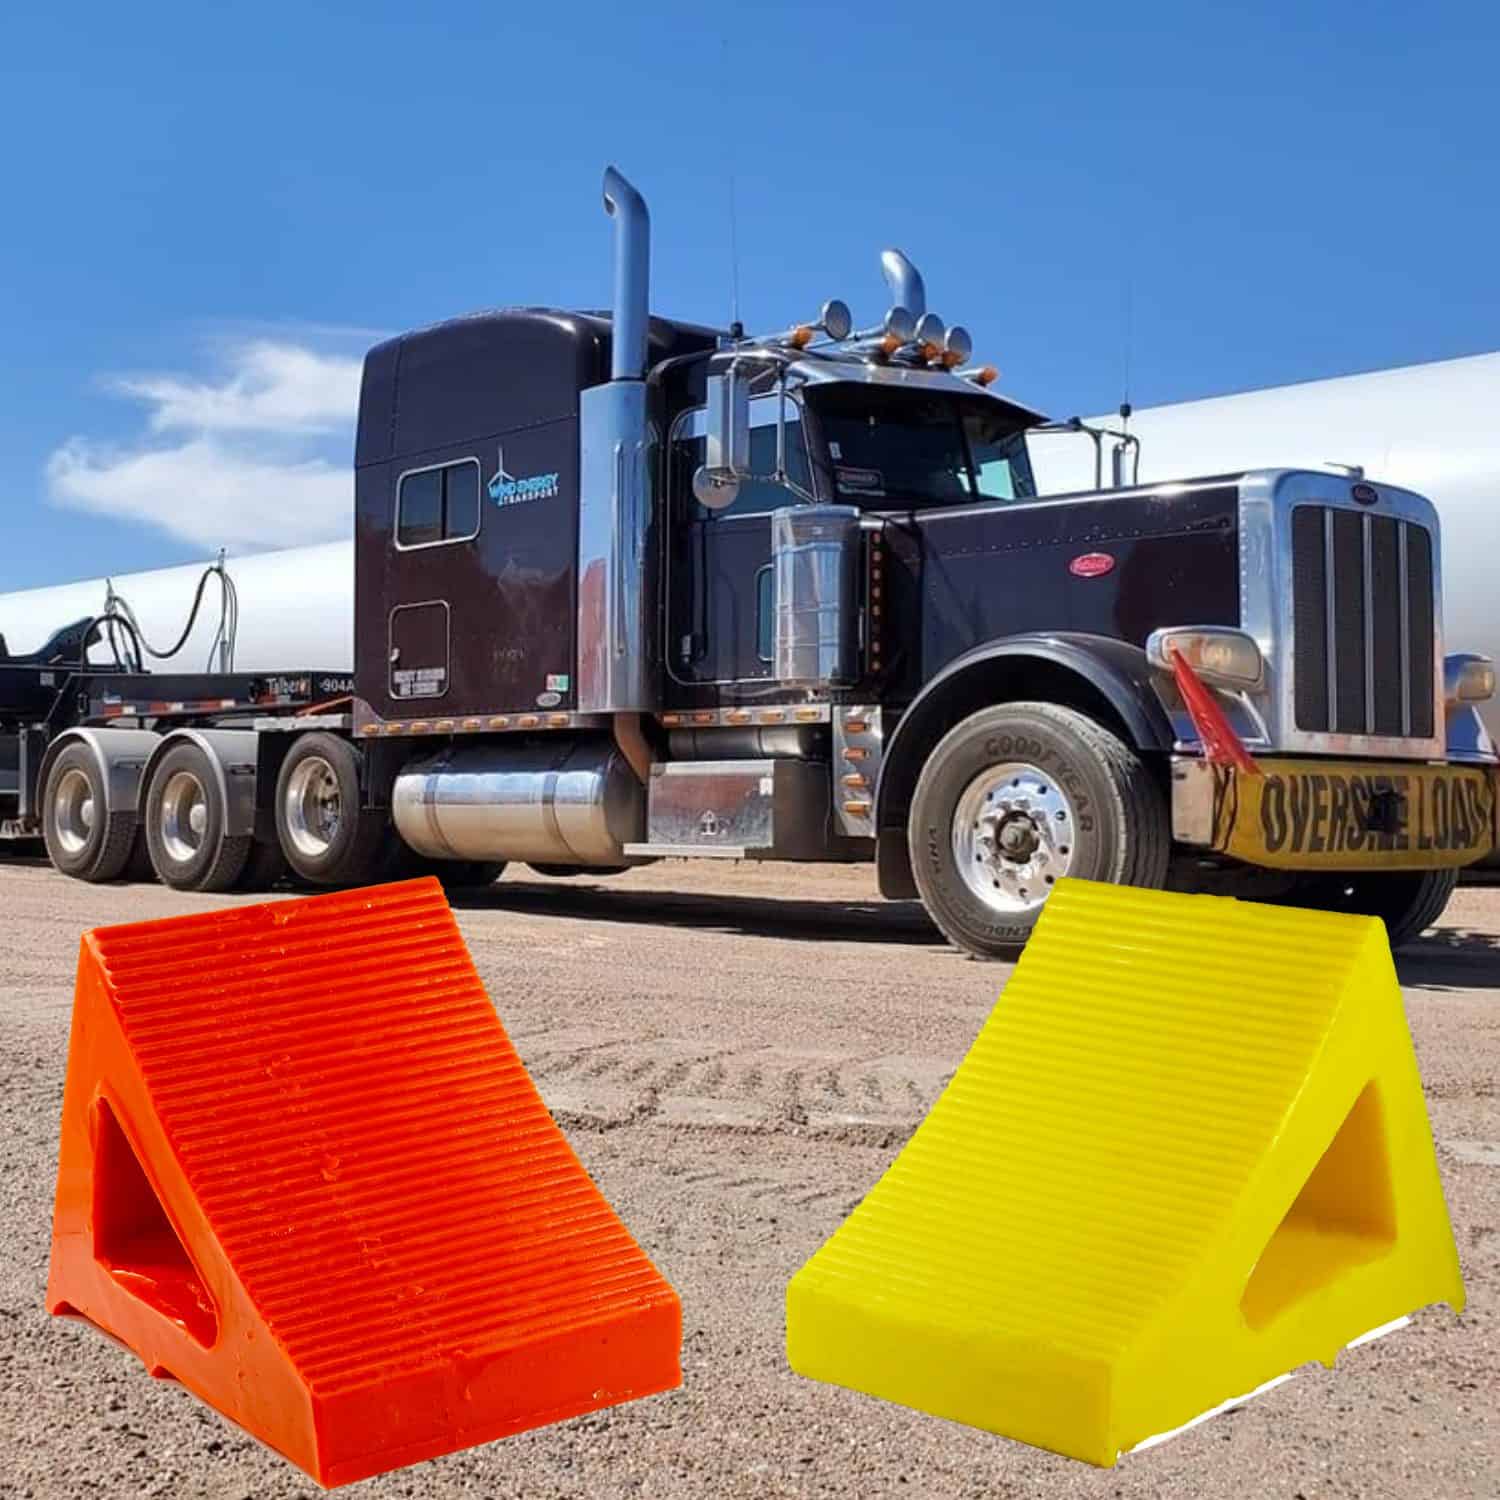 5 Year Warranty Trailer Truck Outdoor Grade Weatherproof Motorcycle & Car Polyurethane Better Than Rubber or Plastic 2 Pack Black Elasco Products RV Wheel Chock Camper Accessories 